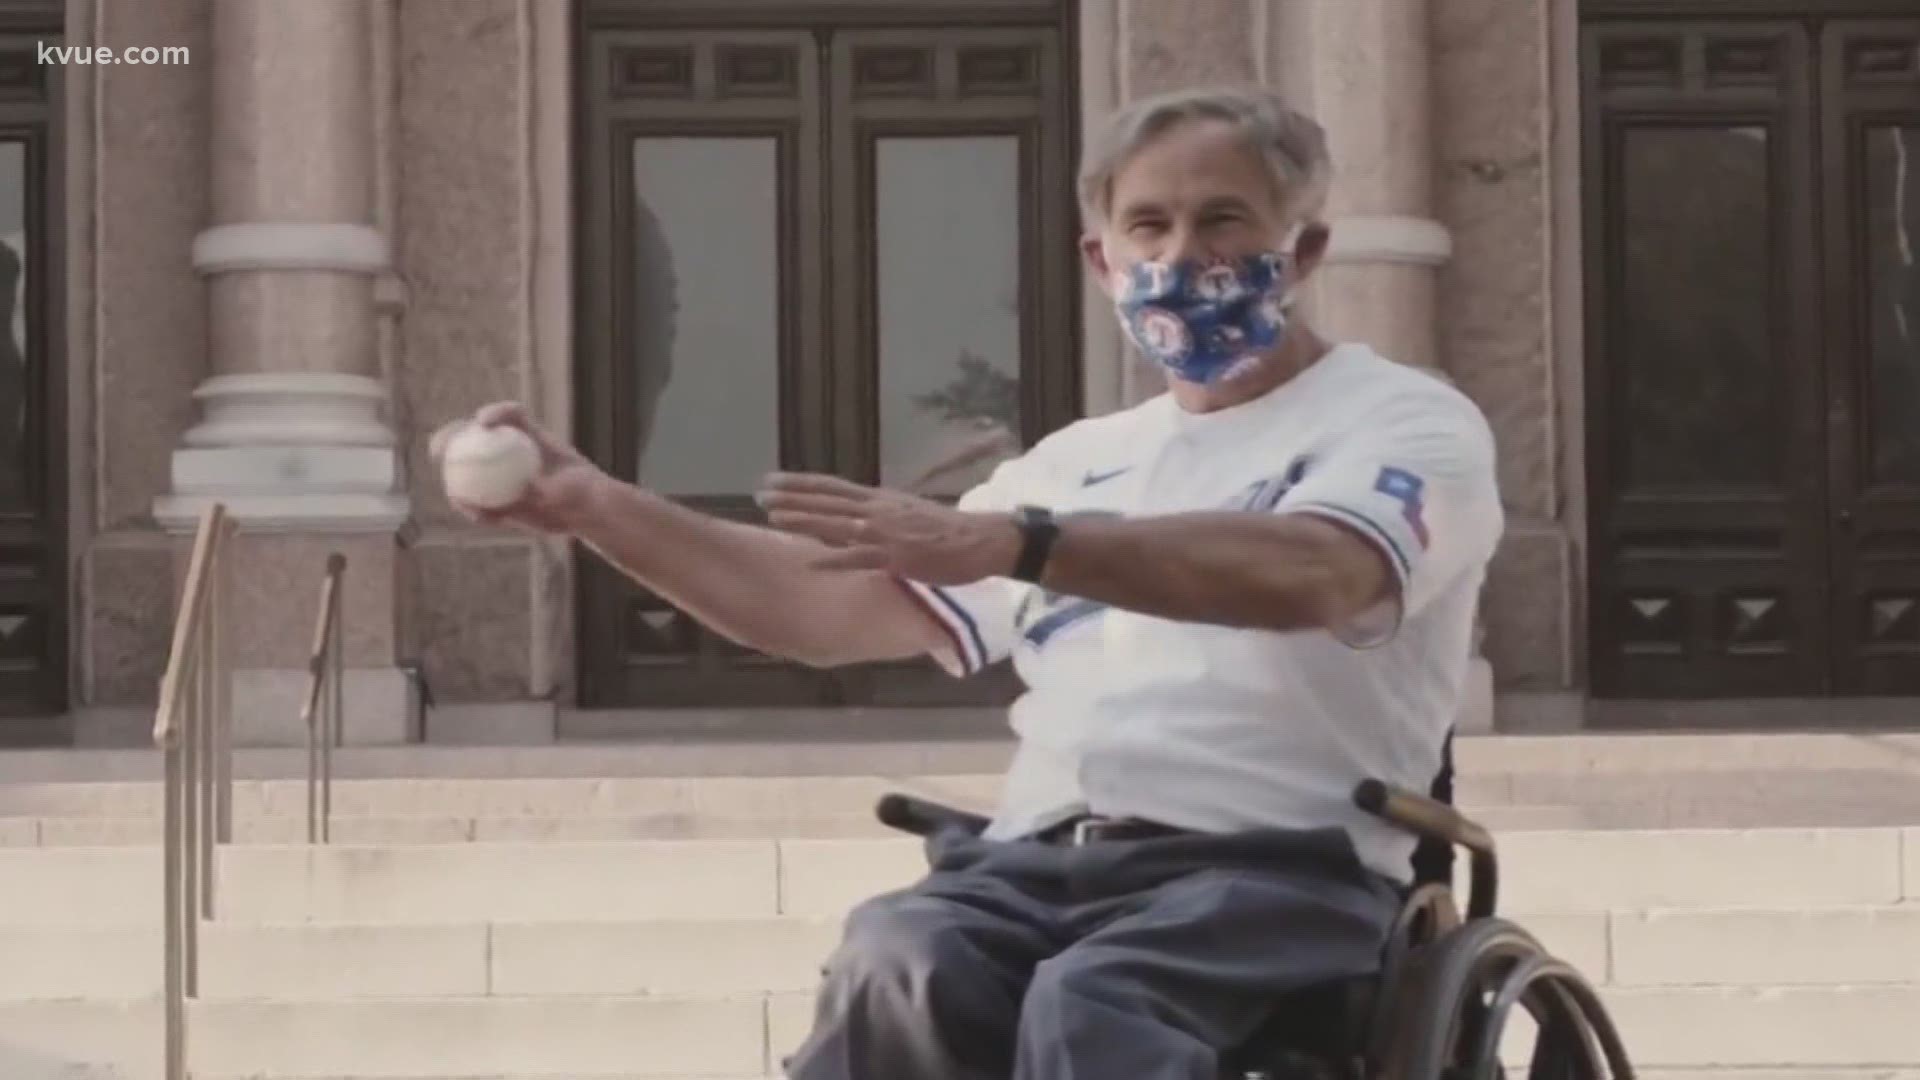 Gov. Greg Abbott was asked to throw out the first pitch at the Texas Rangers' home opener Monday. But that didn't happen.